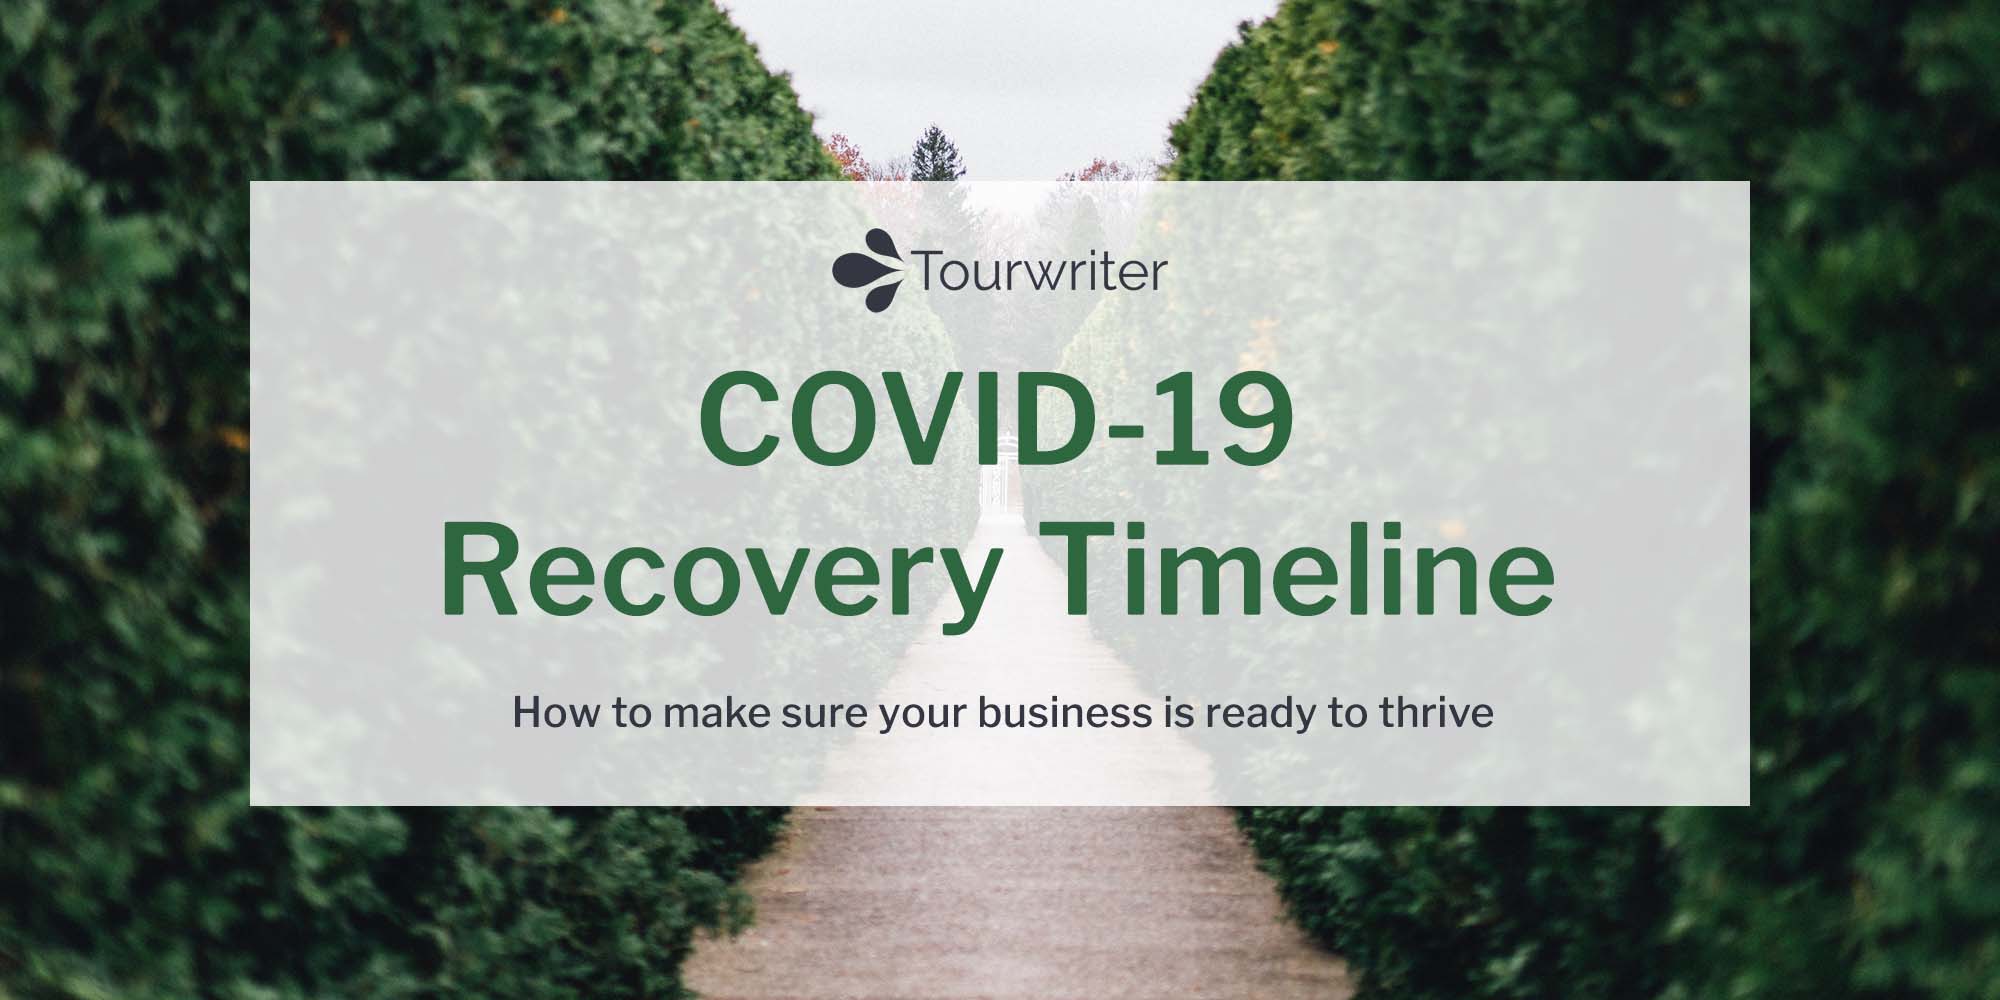 COVID-19: The Tour Operator’s Recovery Timeline